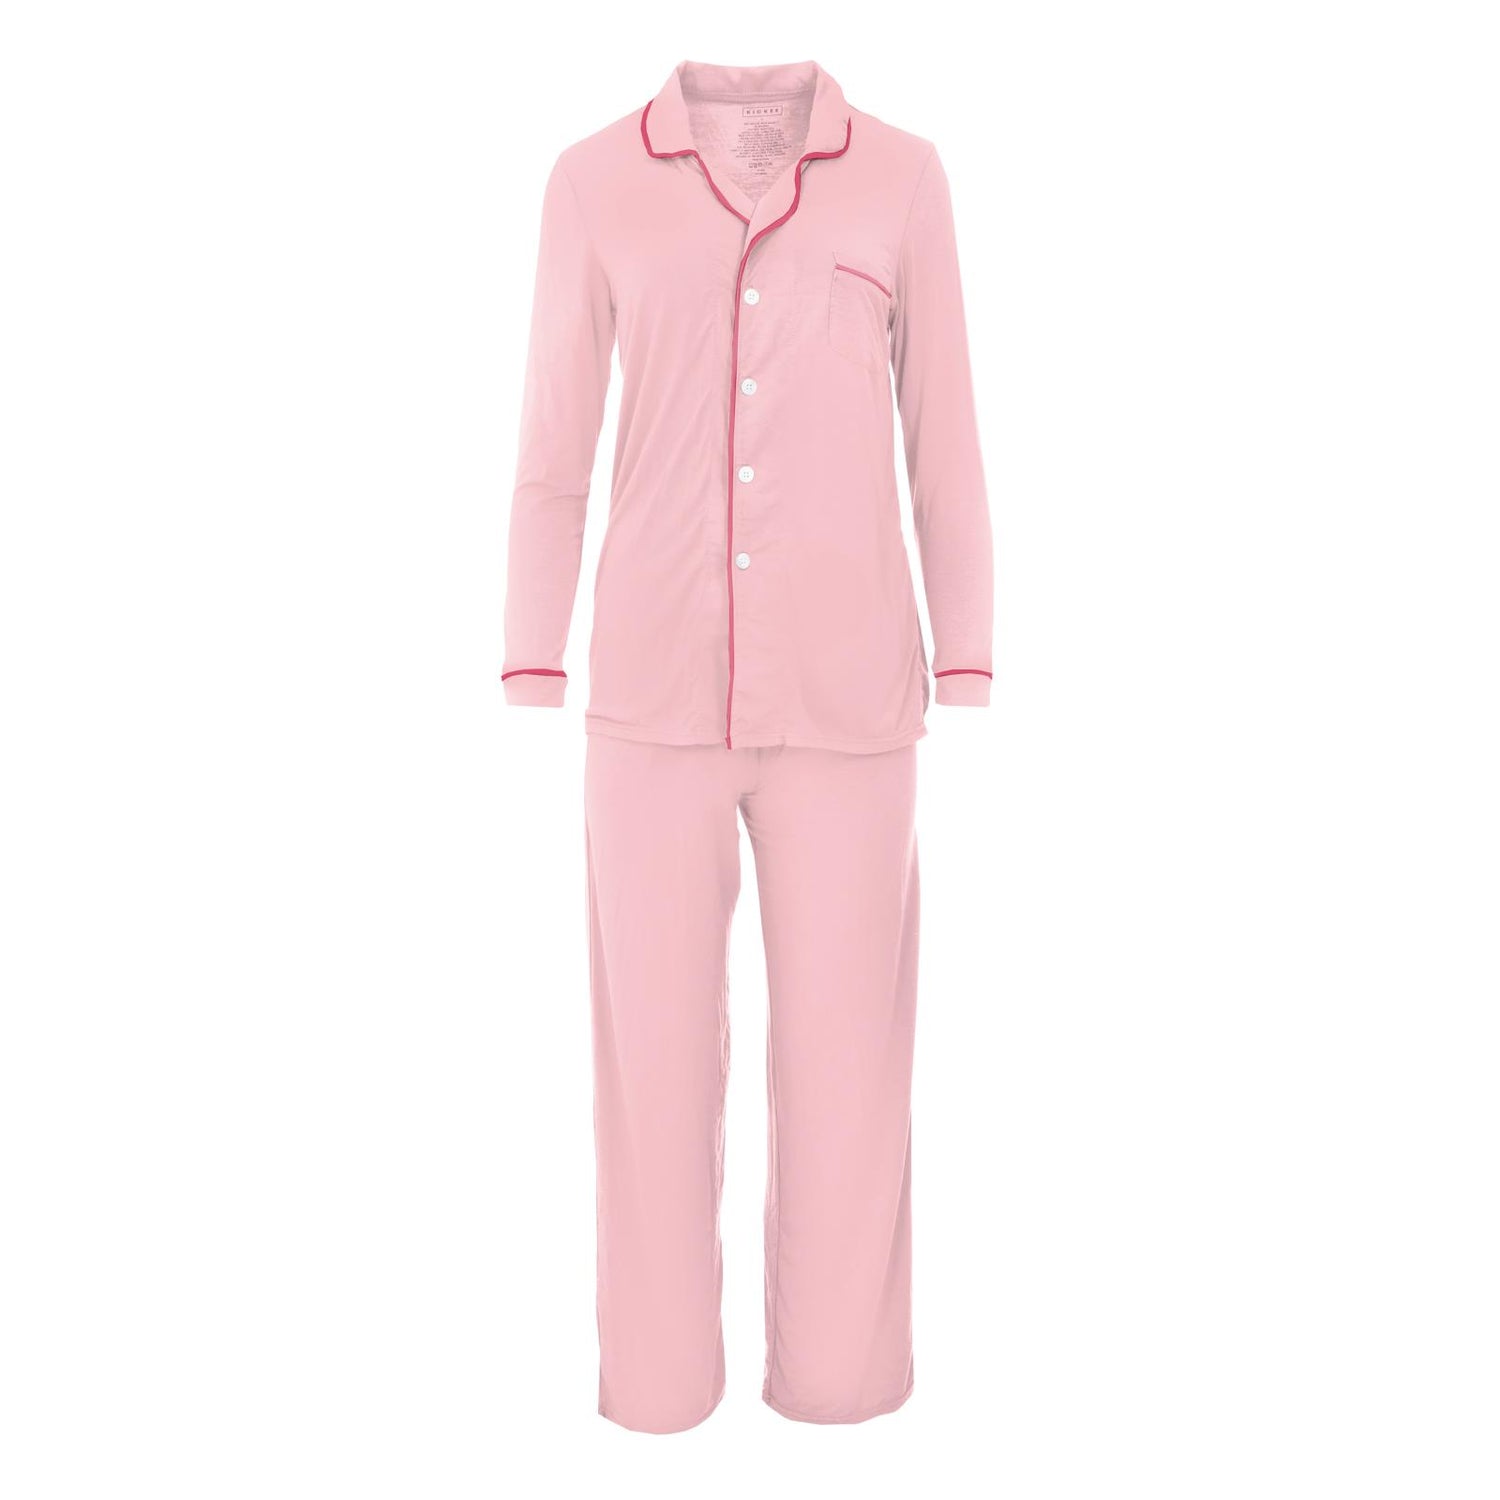 Women's Long Sleeved Collared Pajama Set in Lotus with Winter Rose